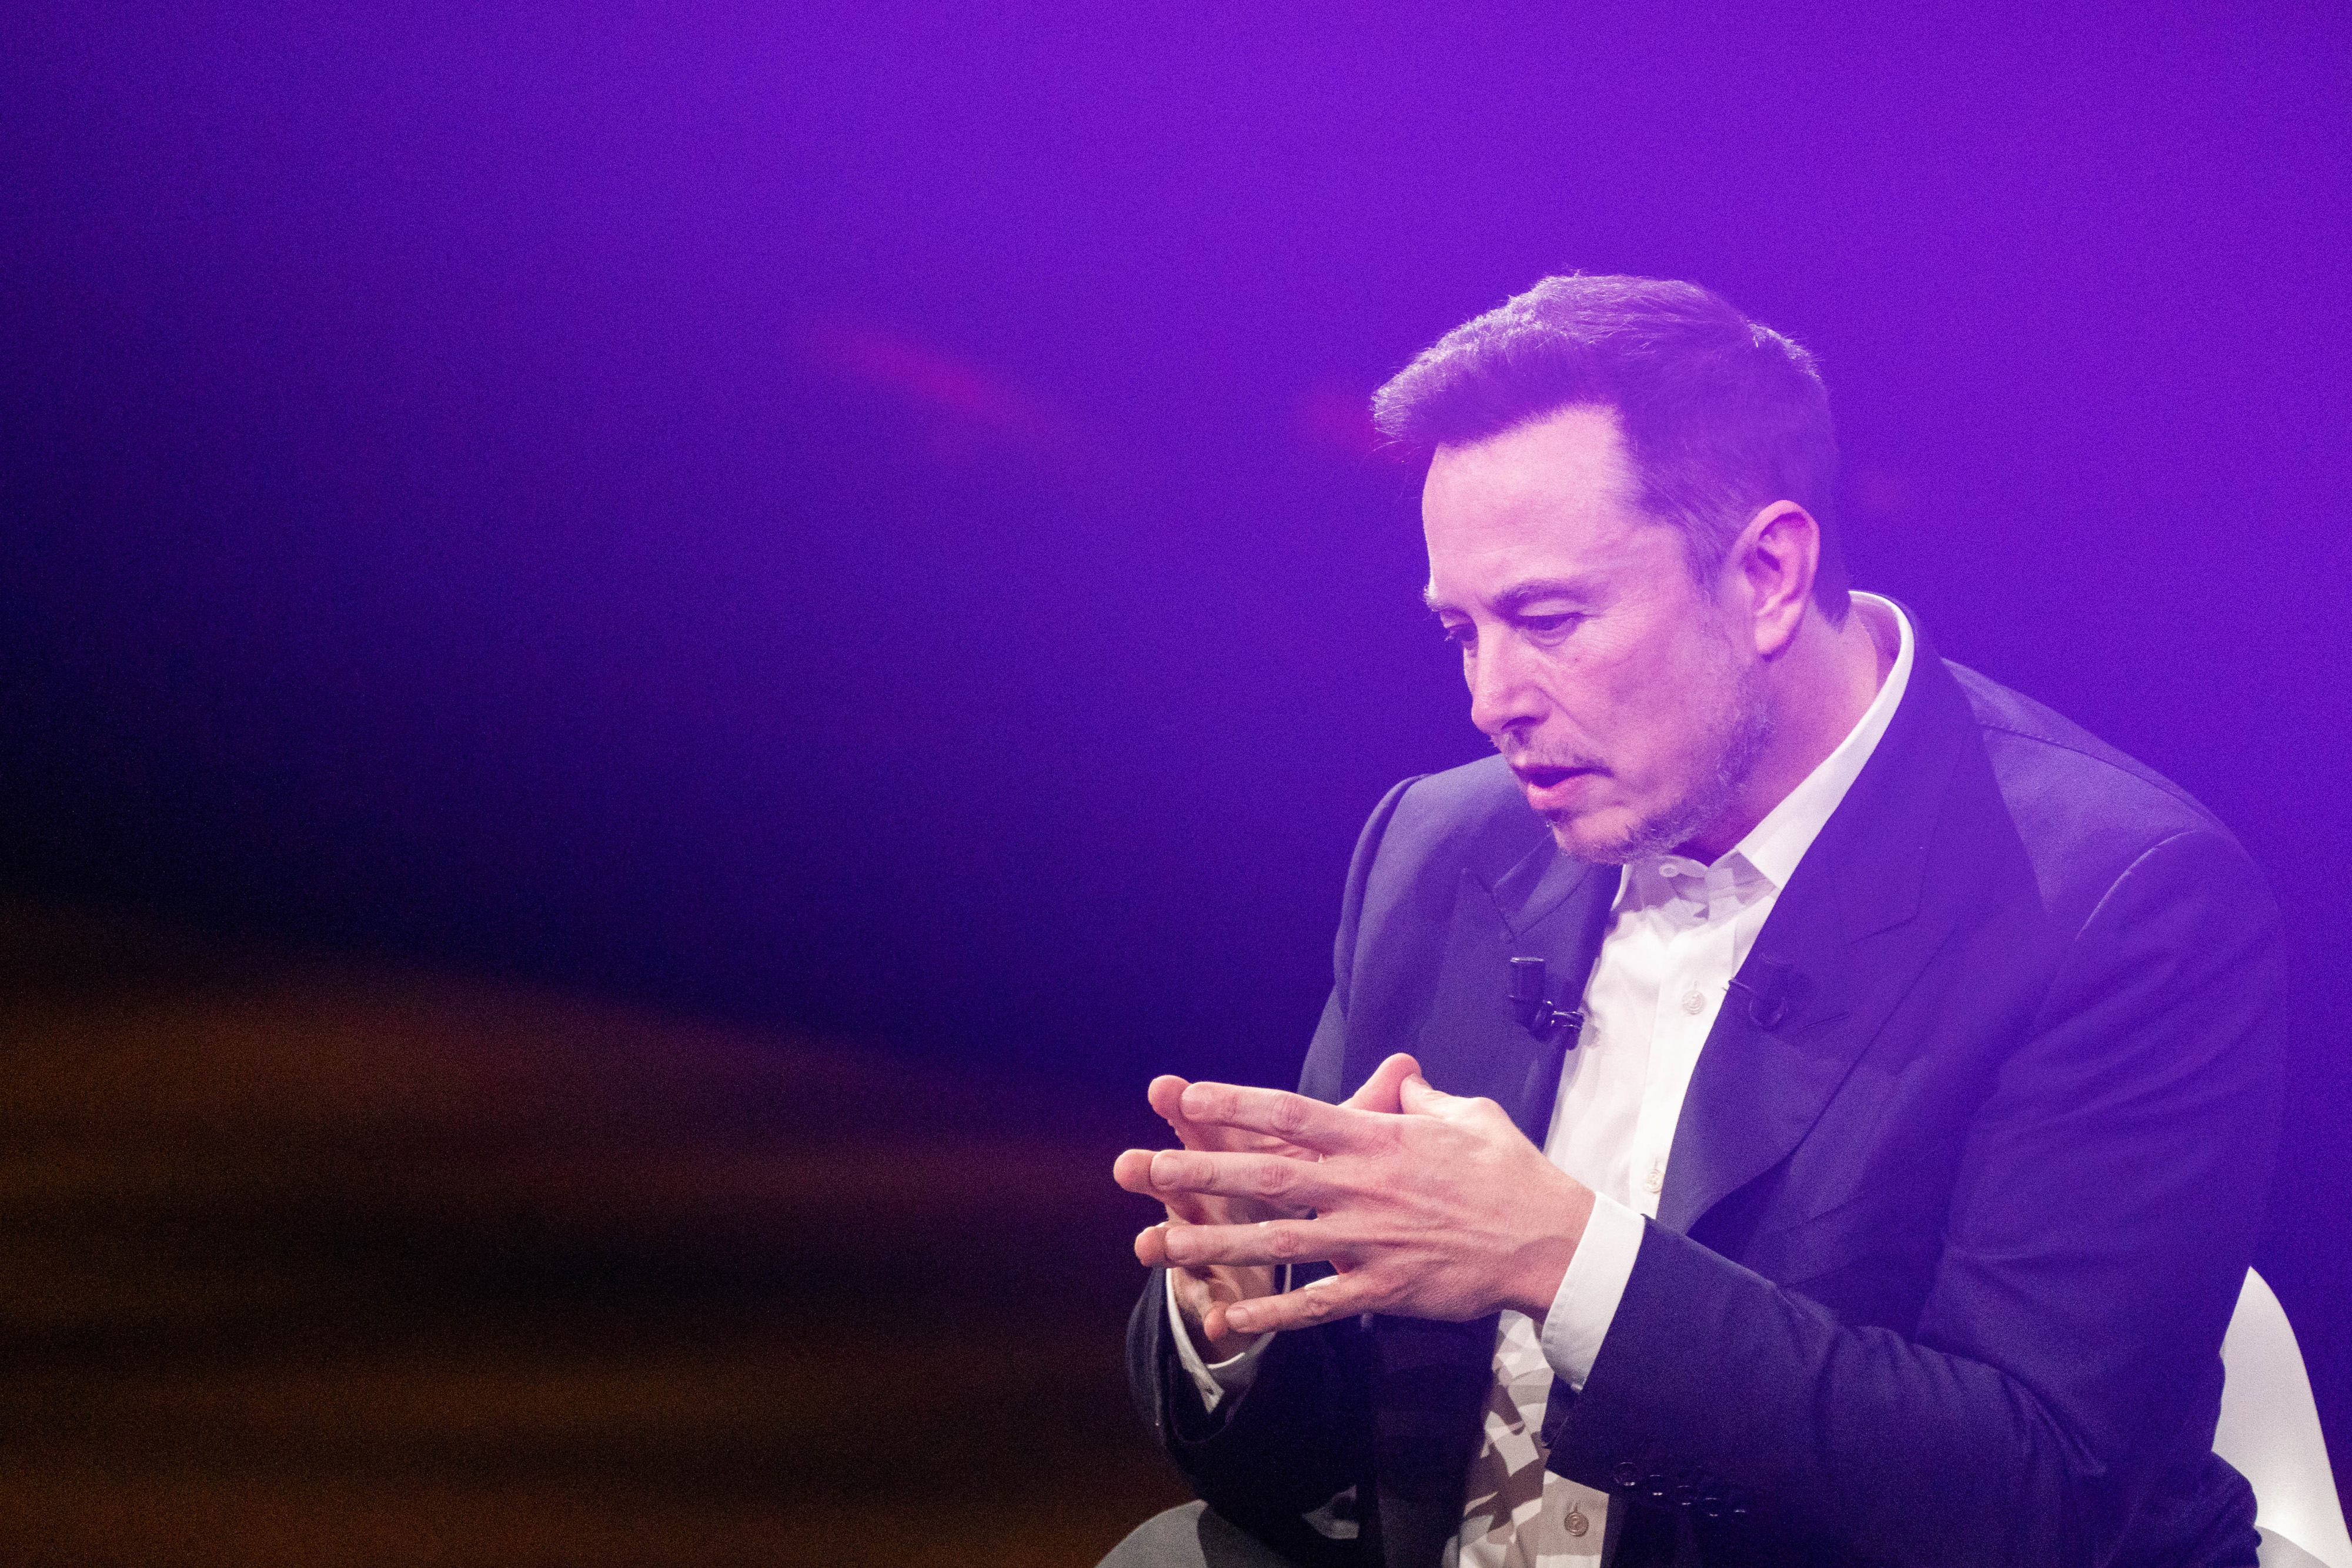 Elon Musk, wearing a black suit and white shirt, speaks as he puts his hands together in front of him, framed by a purple background.